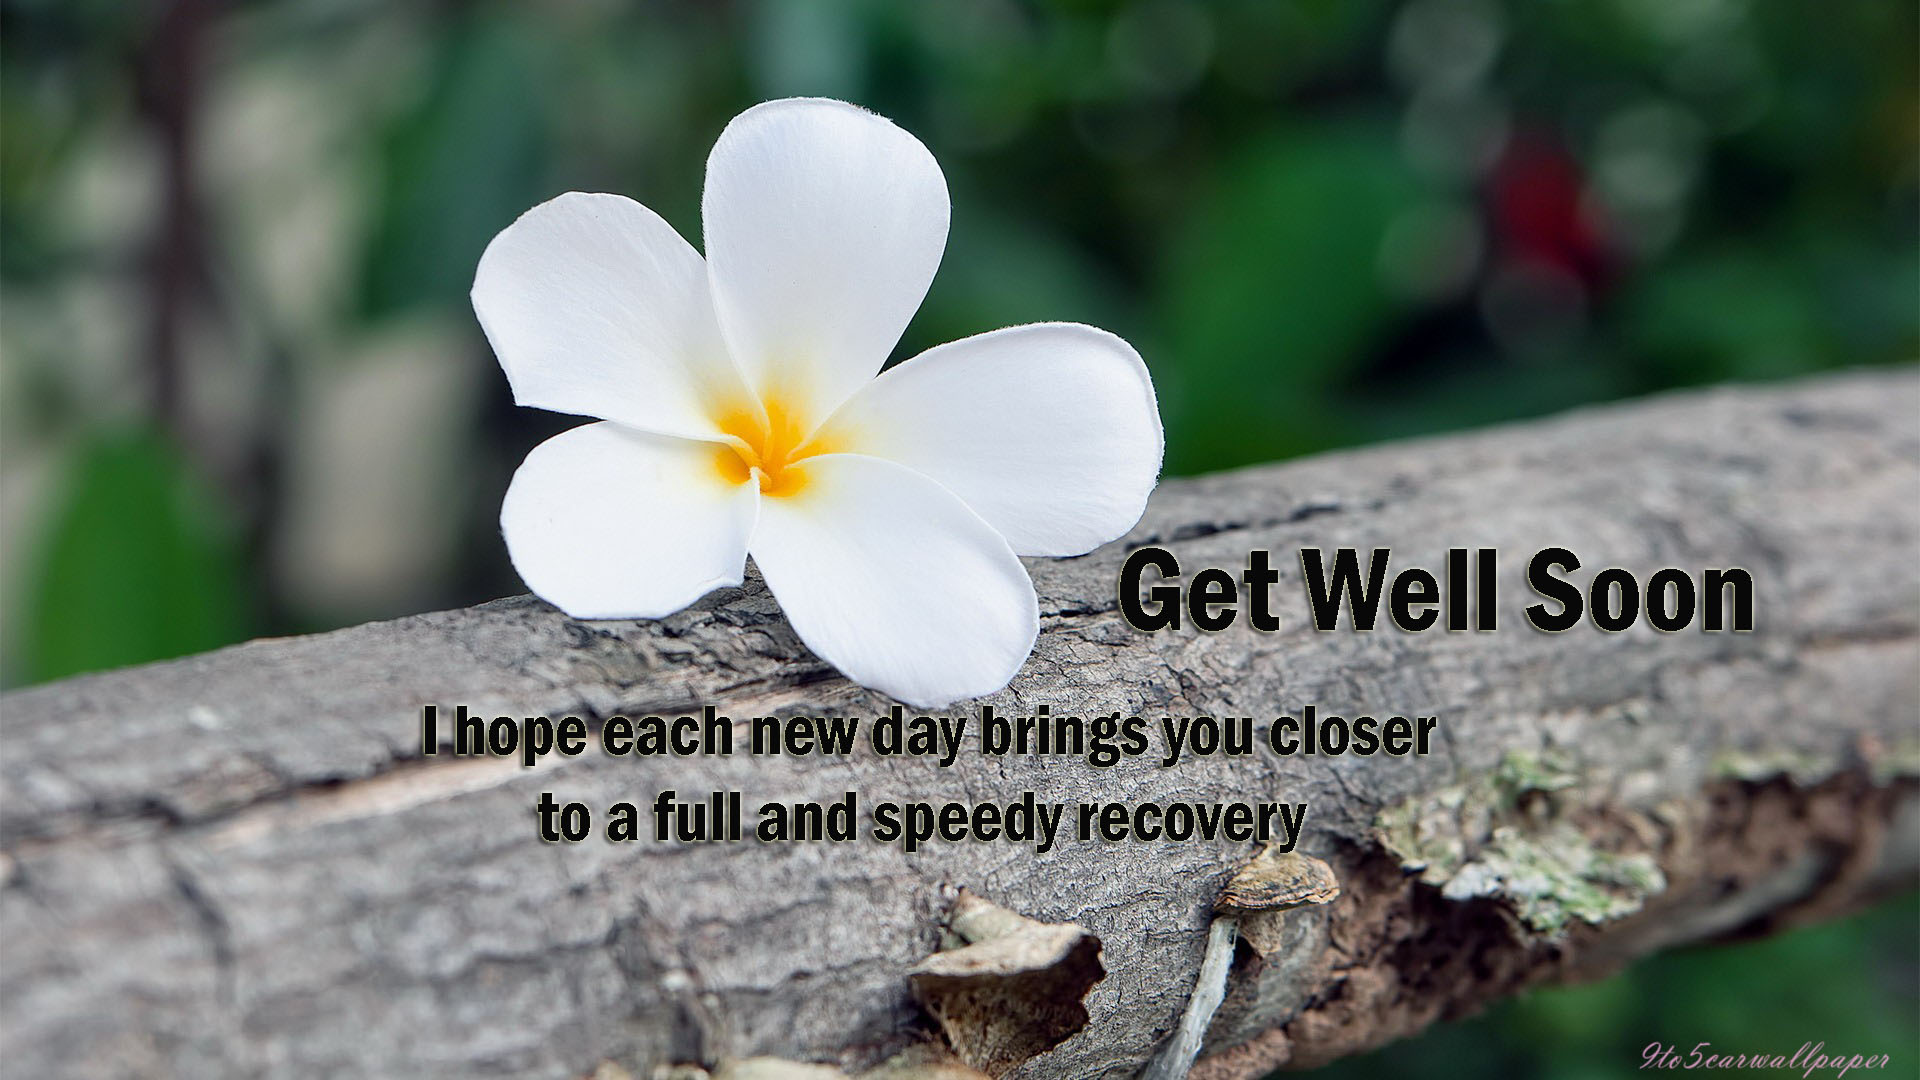 get-well-images-cards-posters